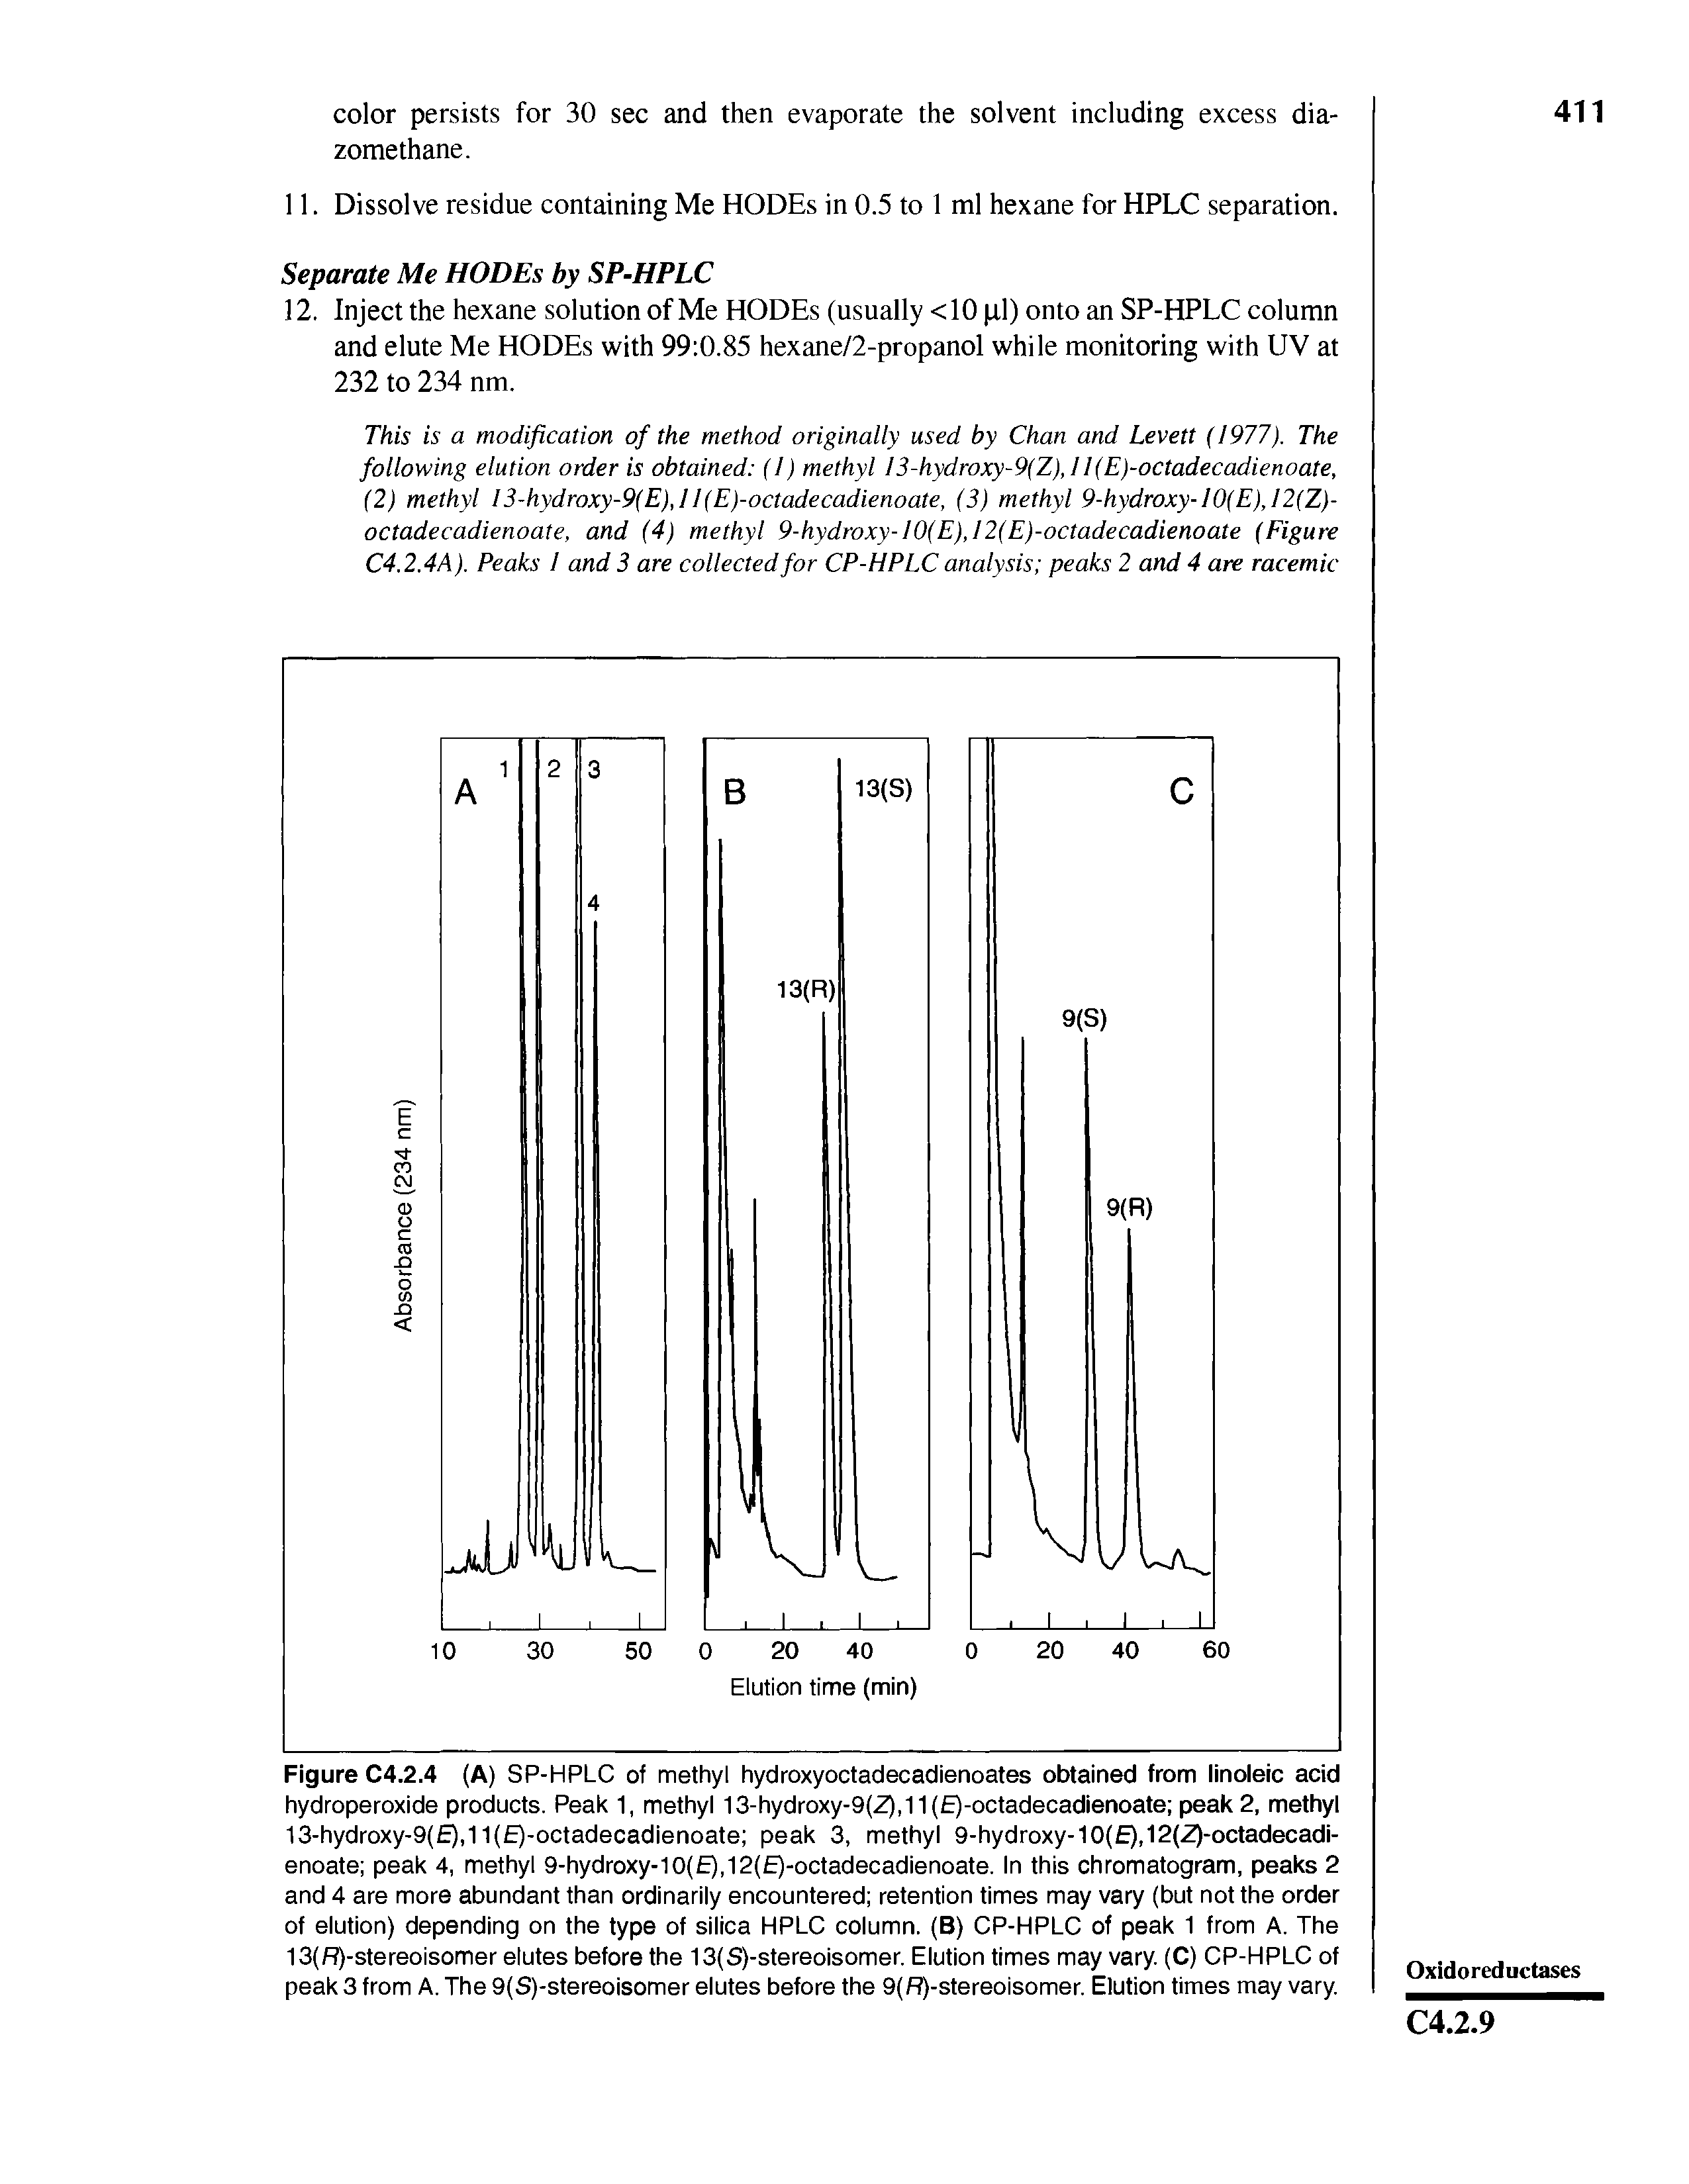 Figure C4.2.4 (A) SP-HPLC of methyl hydroxyoctadecadienoates obtained from linoleic acid hydroperoxide products. Peak 1, methyl 13-hydroxy-9(Z),11( )-octadecadienoate peak 2, methyl 13-hydroxy-9( ),11(E)-octadecadienoate peak 3, methyl 9-hydroxy-10(E),12(Z)-octadecadi-enoate peak 4, methyl 9-hydroxy-10( ),12( )-octadecadienoate. In this chromatogram, peaks 2 and 4 are more abundant than ordinarily encountered retention times may vary (but not the order of elution) depending on the type of silica HPLC column. (B) CP-HPLC of peak 1 from A. The 13(R)-stereoisomer elutes before the 13(S)-stereoisomer. Elution times may vary. (C) CP-HPLC of peak 3 from A. The 9(S)-stereoisomer elutes before the 9(R)-stereoisomer. Elution times may vary.